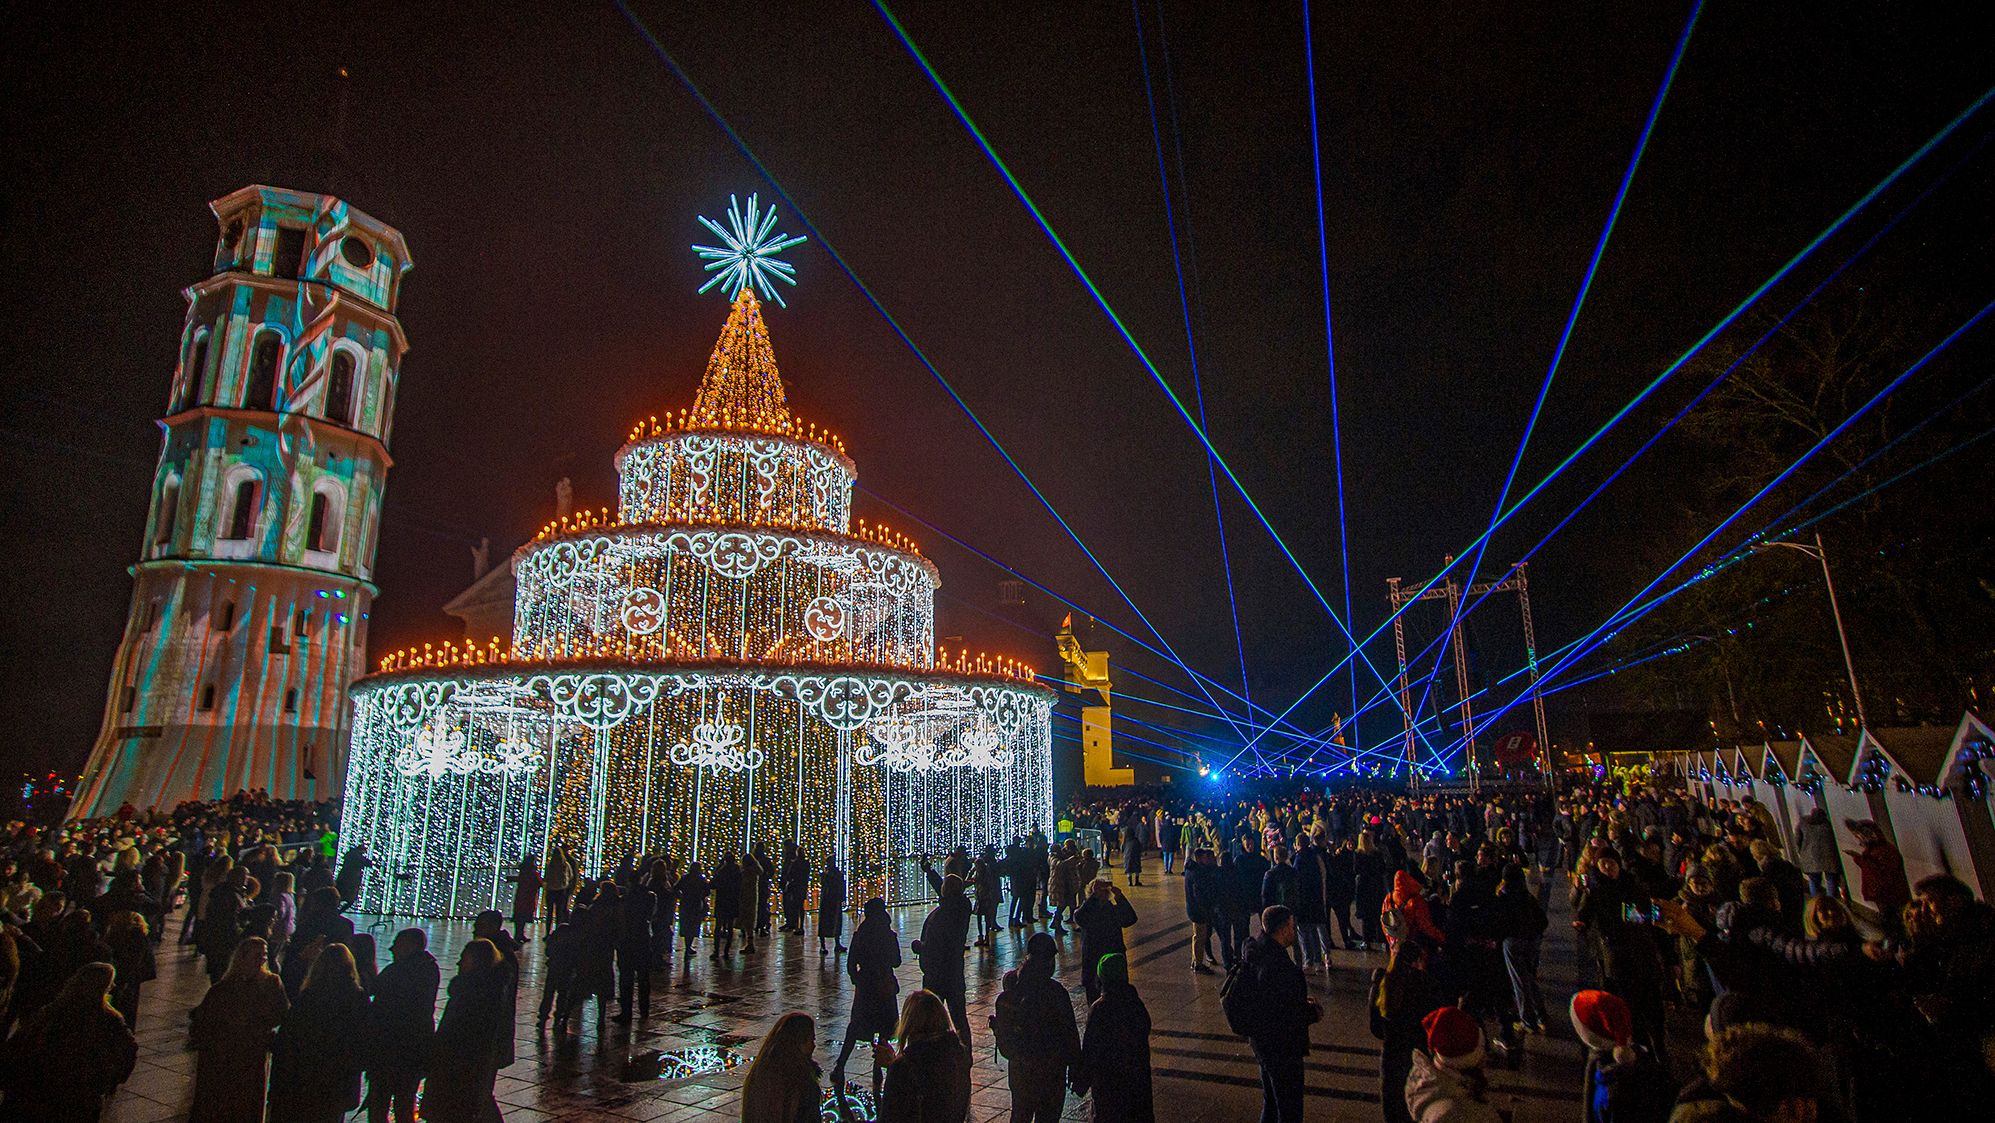 People gather in Vilnius, Lithuania, to watch a light and laser show.